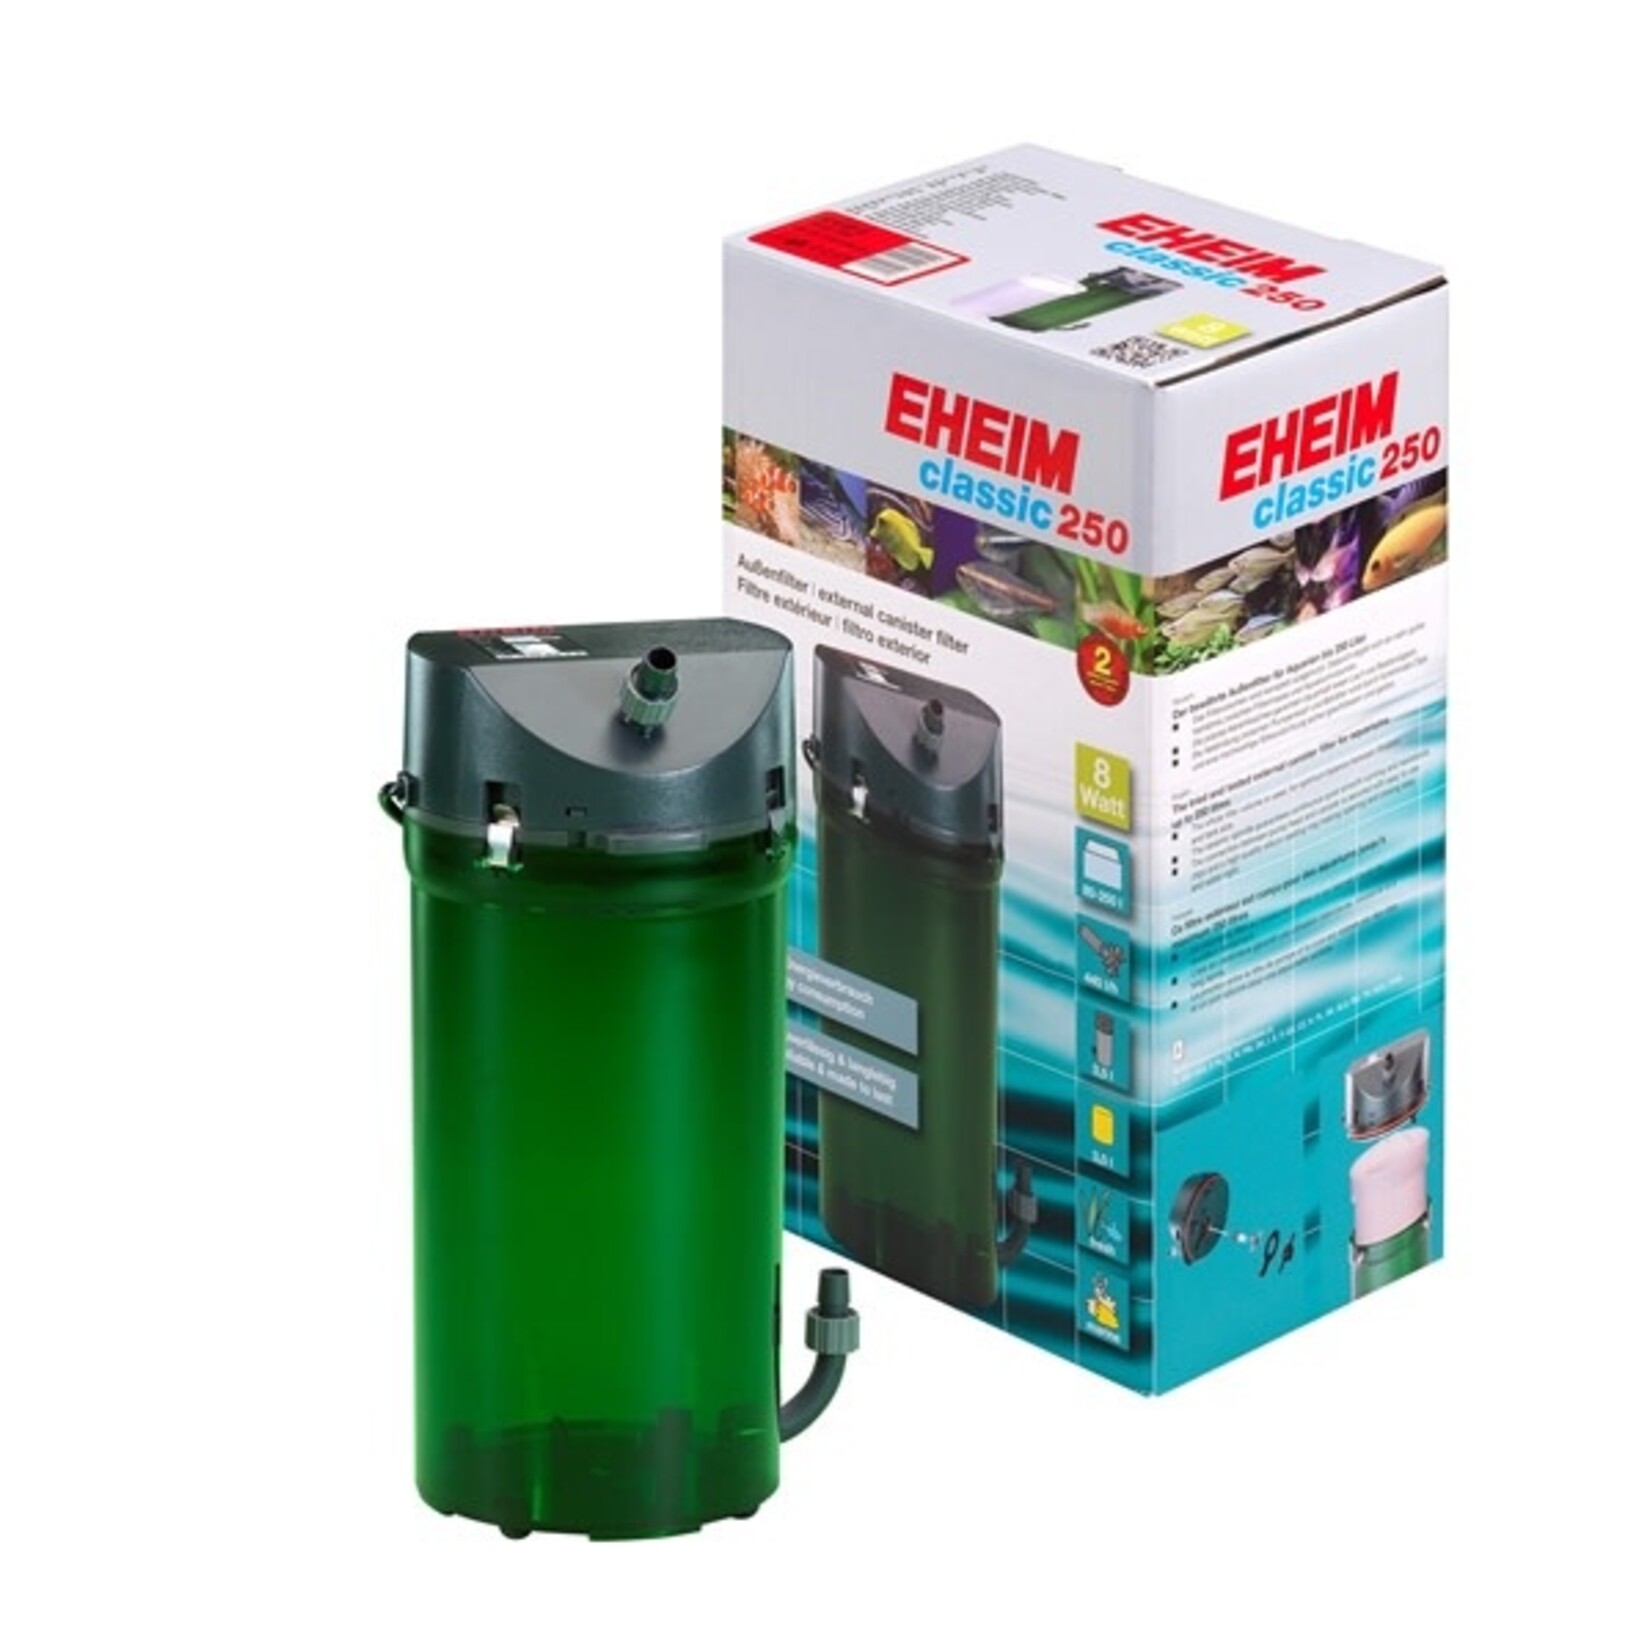 Eheim external filter classic 2213 with mass and double taps 440 l/h